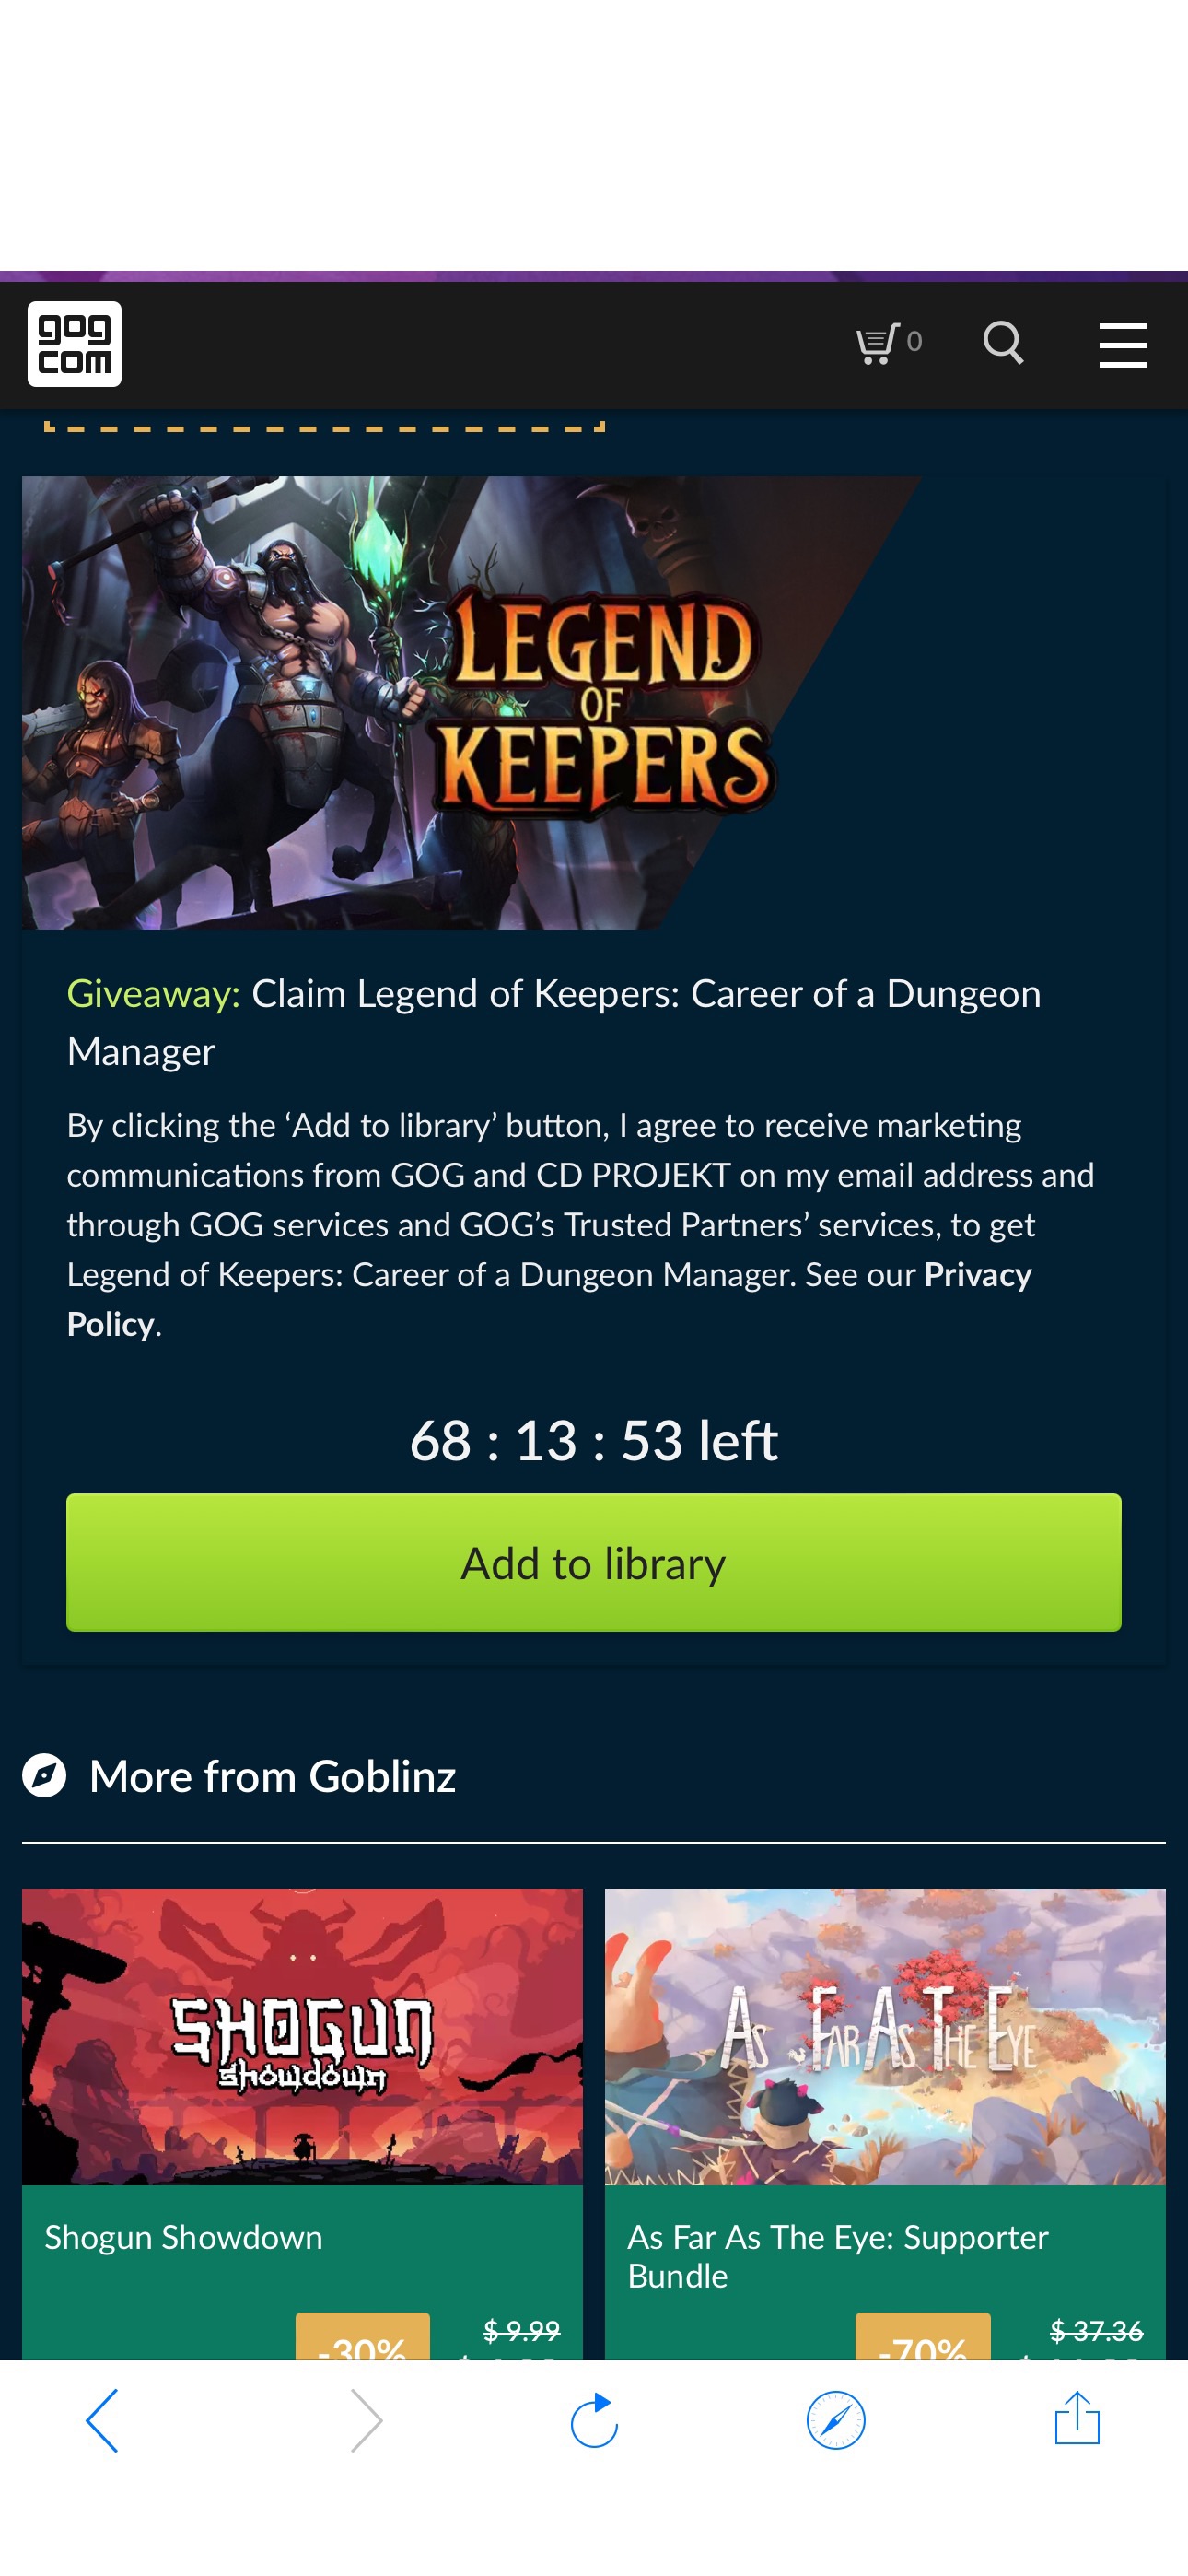 Legend of Keepers: Career of a Dungeon Manager   
give away